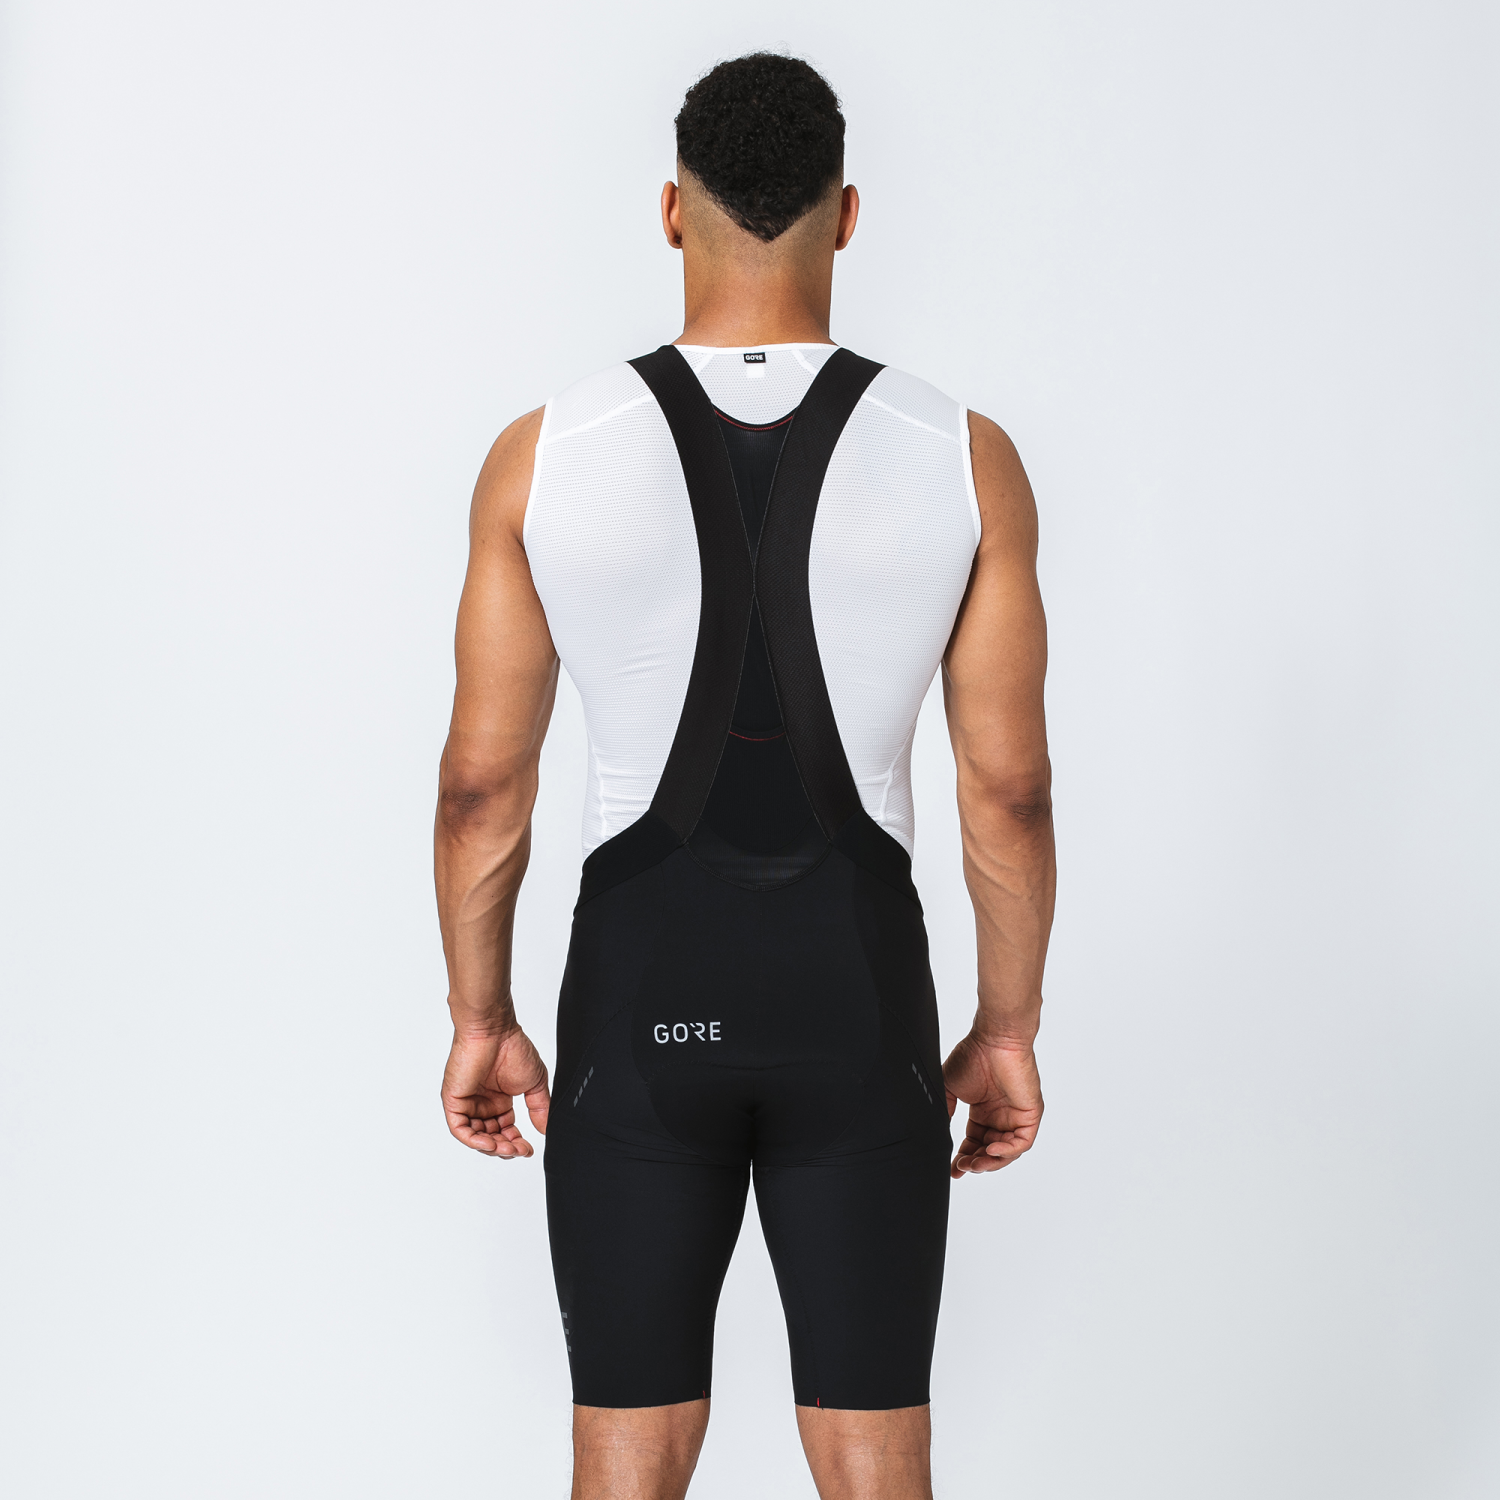 Ditch the shifty chamois with the new GORE Wear C7 bib shorts